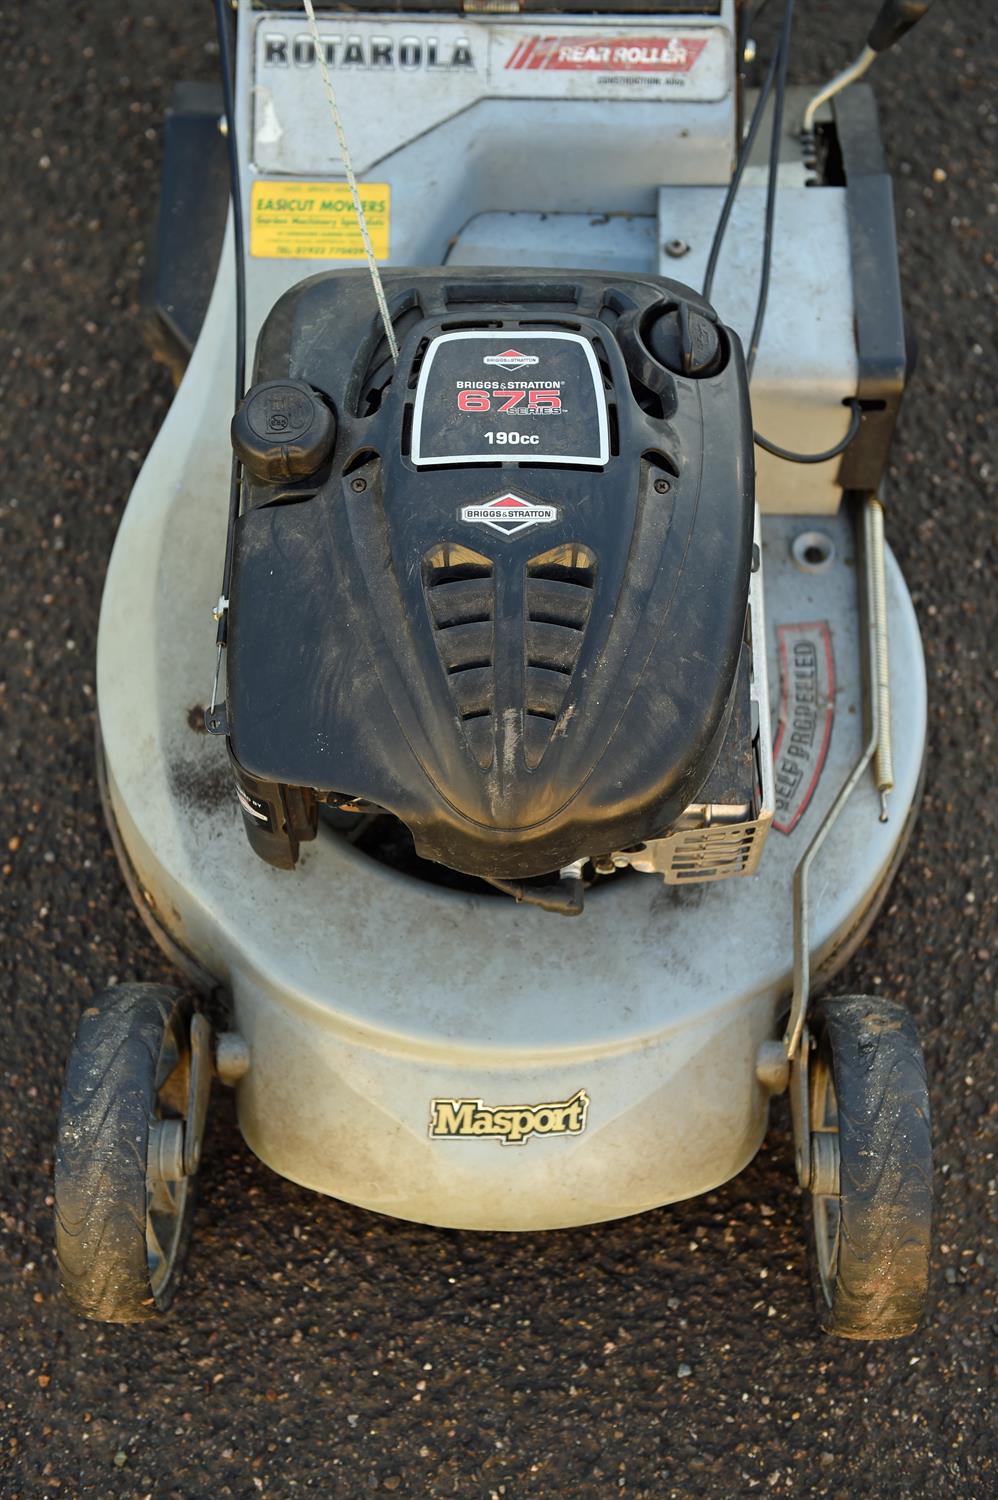 Masport self propelled , Briggs & Stratton 675 Series 190 cc petrol mower with rear roller - Image 5 of 6